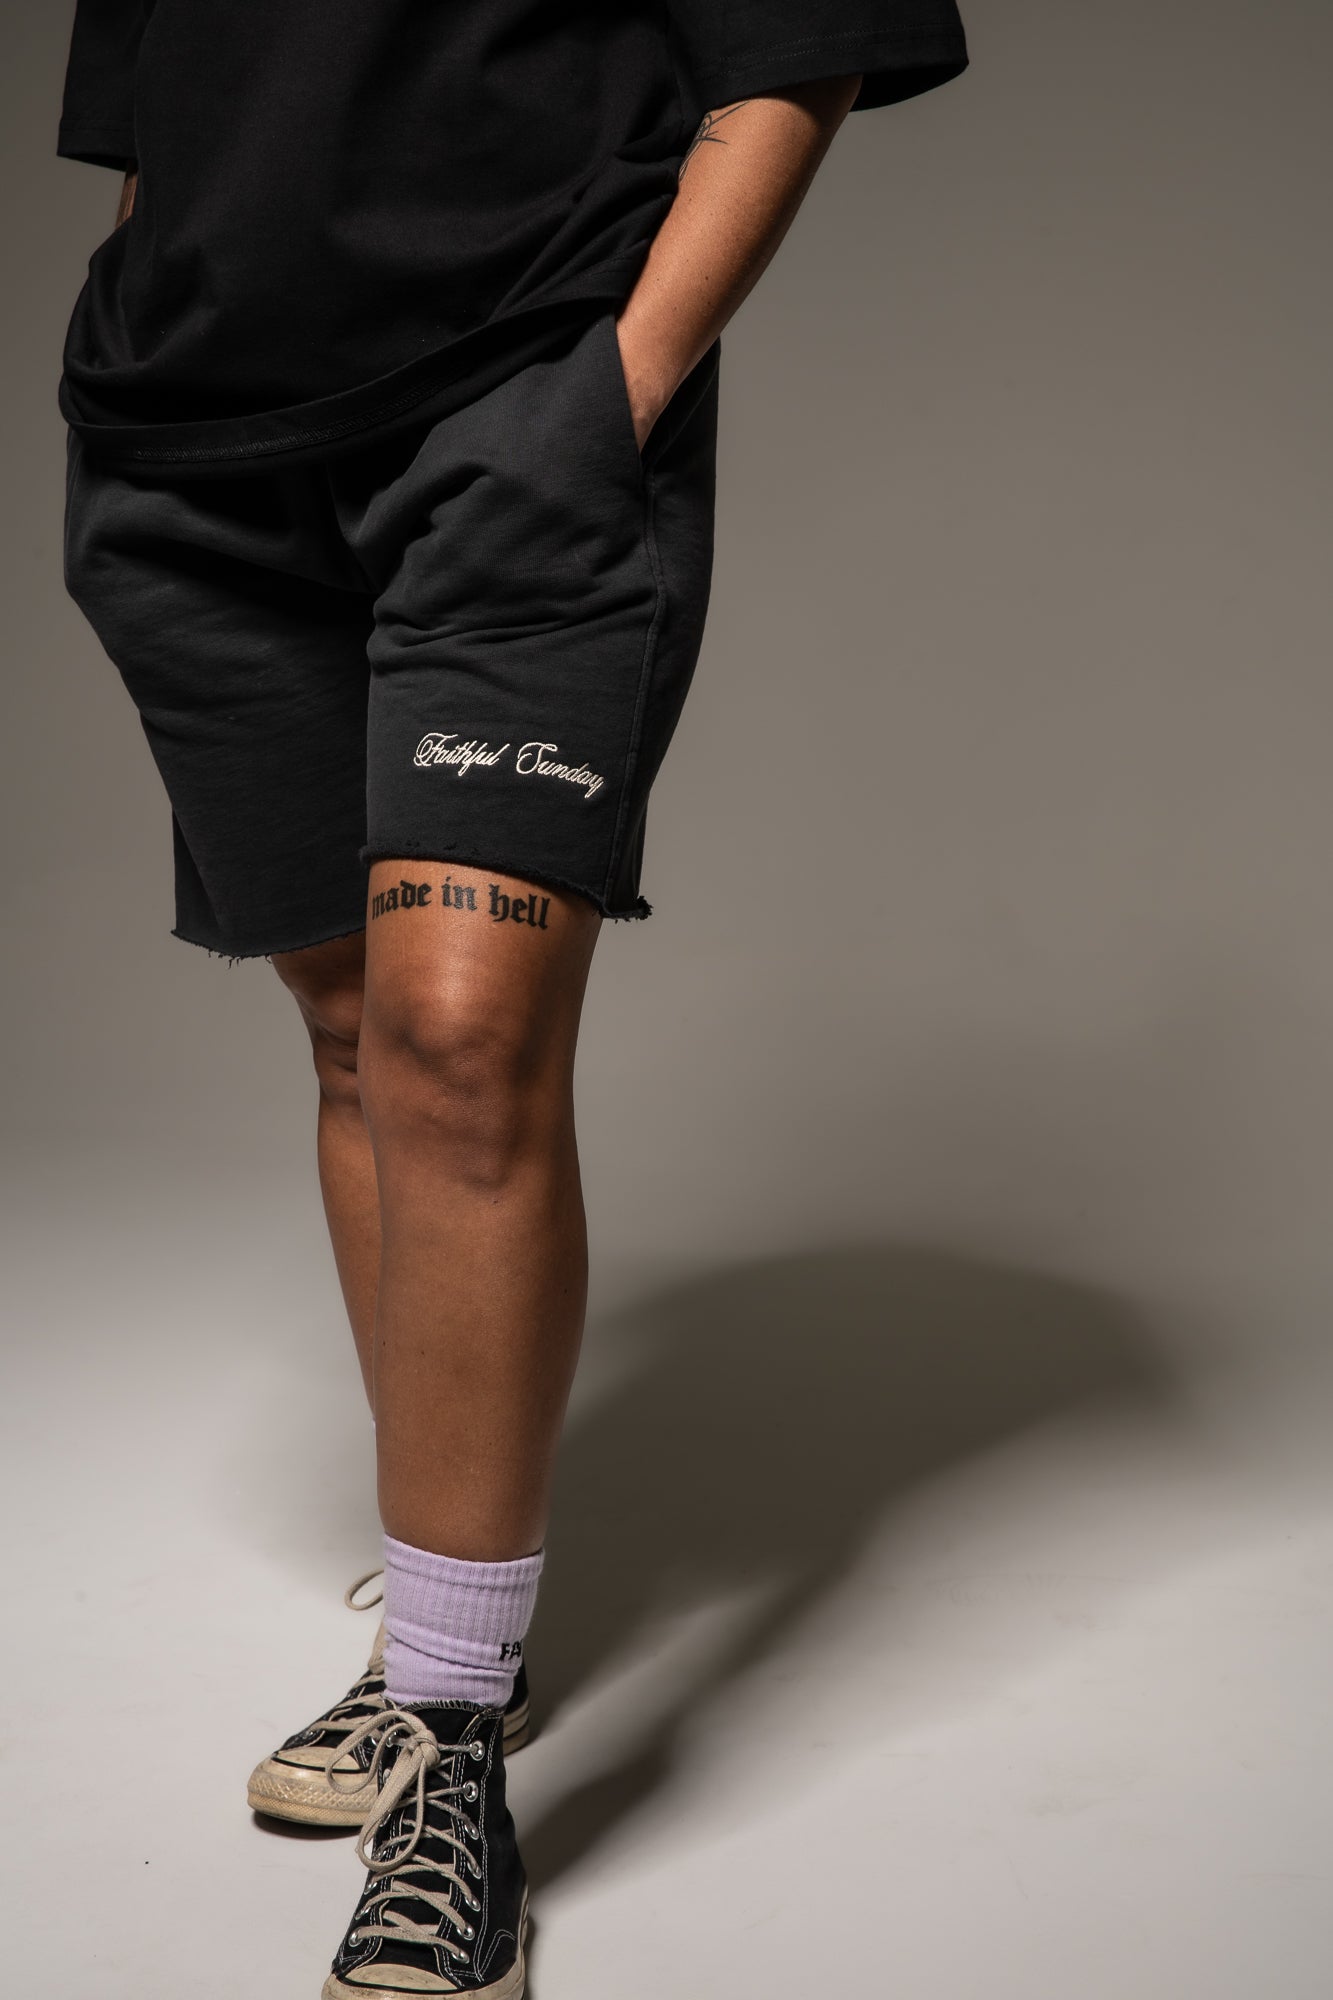 MADE IN HELL TRACK SHORTS